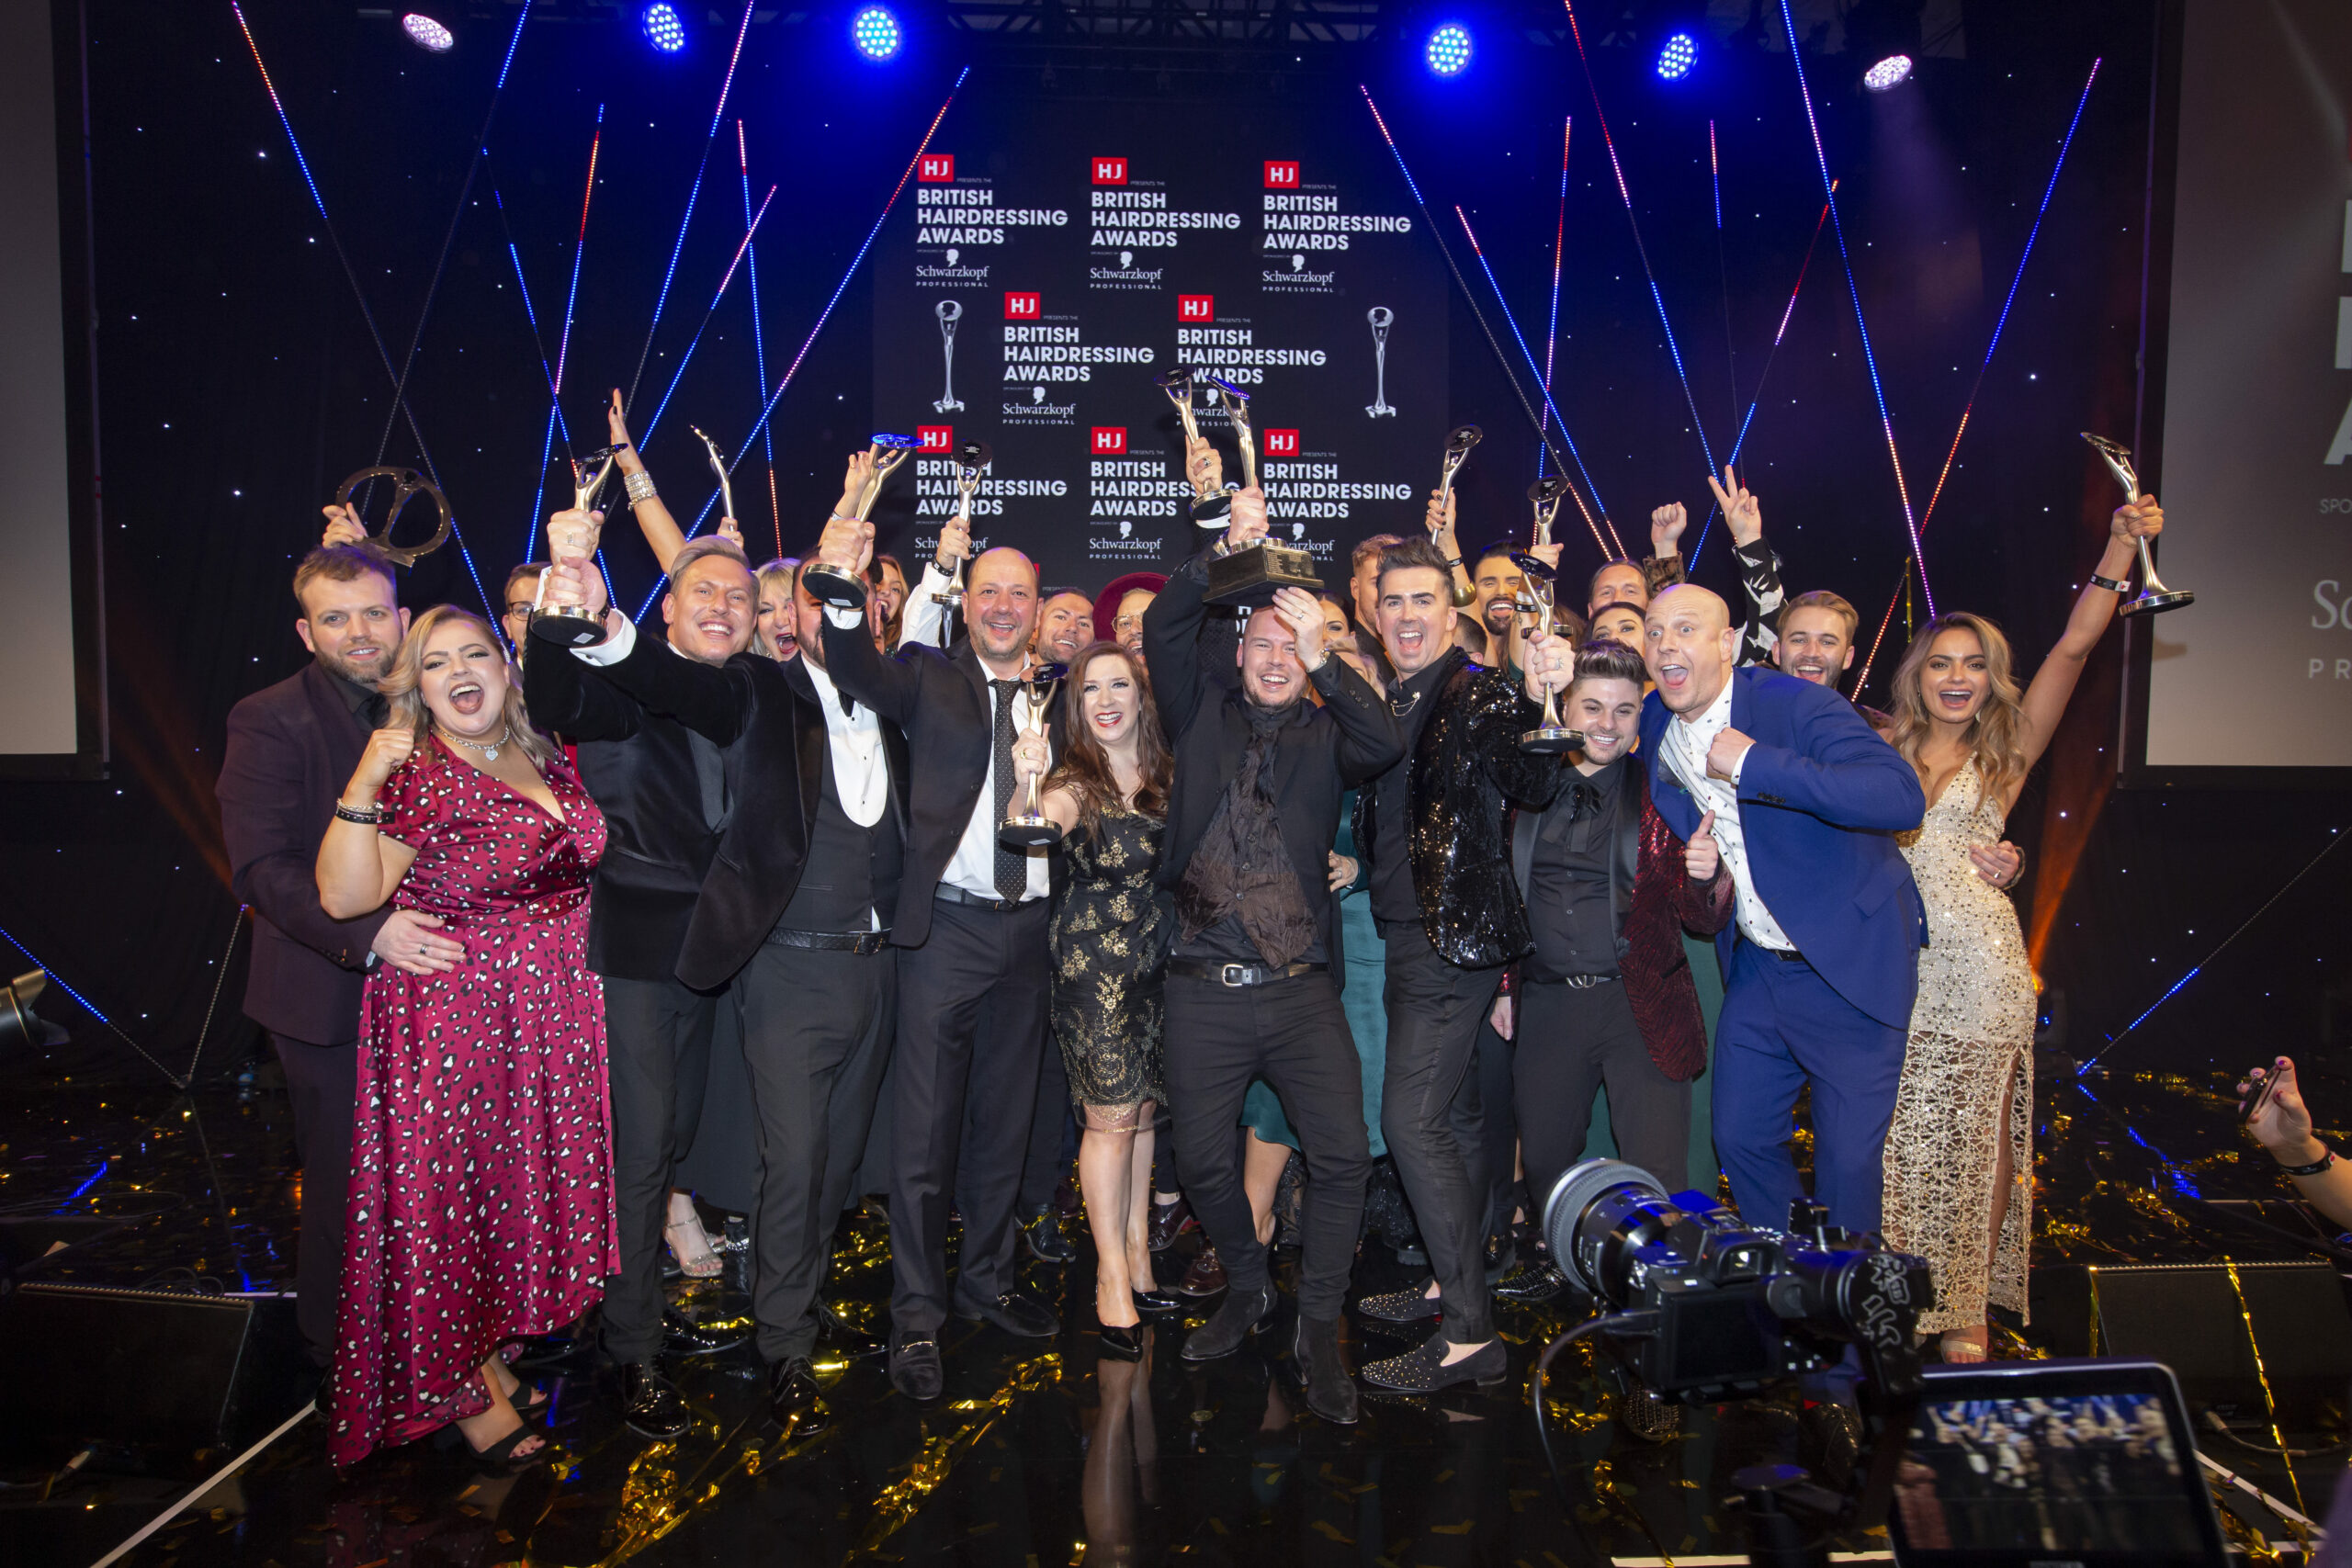 The British Hairdressing Awards 2019 winners are announced